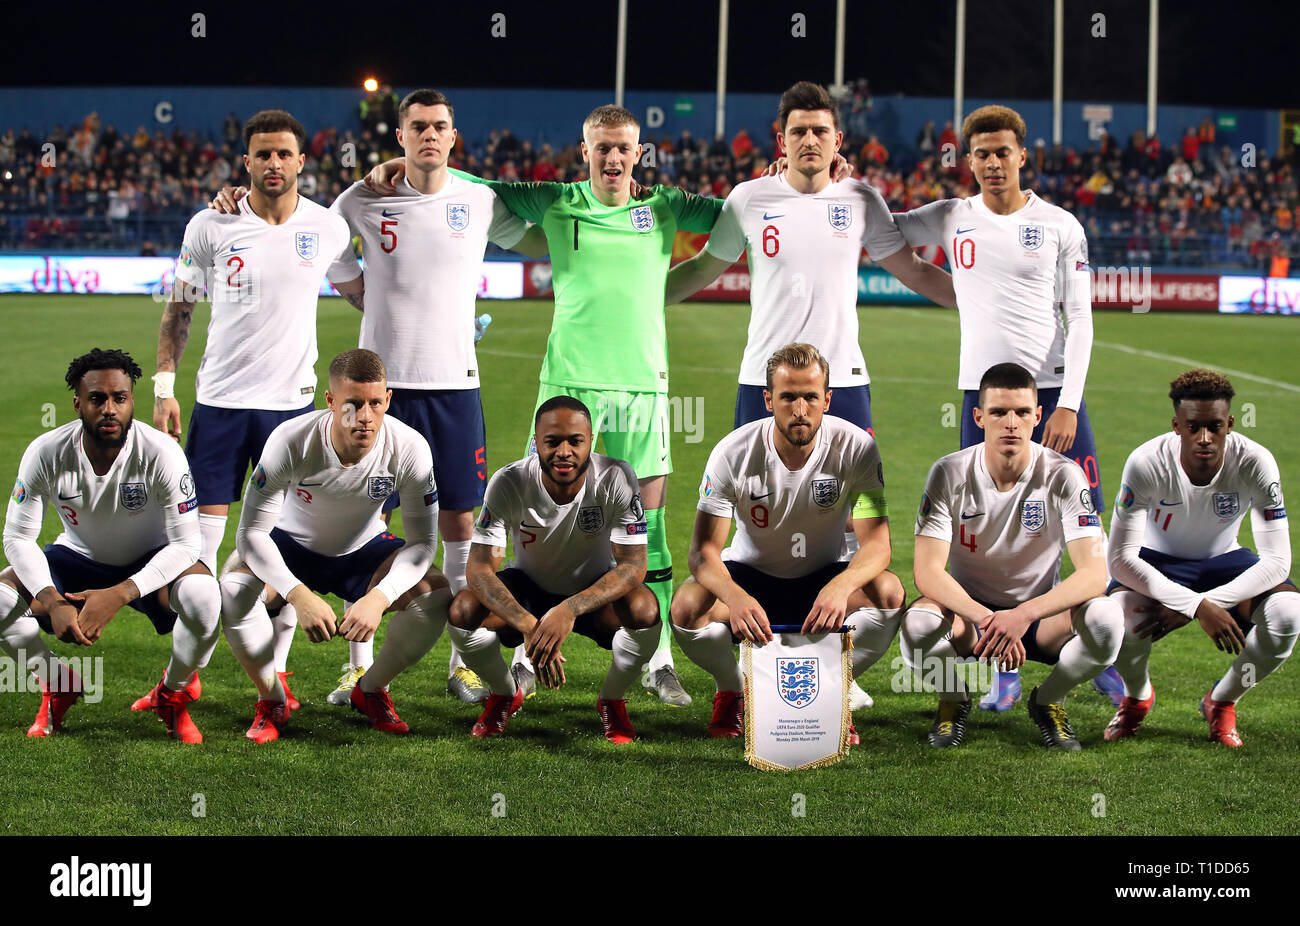 England's (from left to right, back to front) Kyle Walker, Michael Keane, goalkeeper Jordan Pickford, Harry Maguire, Dele Alli, Danny Rose, Ross Barkley, Raheem Sterling, Harry Kane, Declan Rice, and Callum Hudson-Odoi prior to kick-off during the UEFA Euro 2020 Qualifying, Group A match at the Podgorica City Stadium. Stock Photo